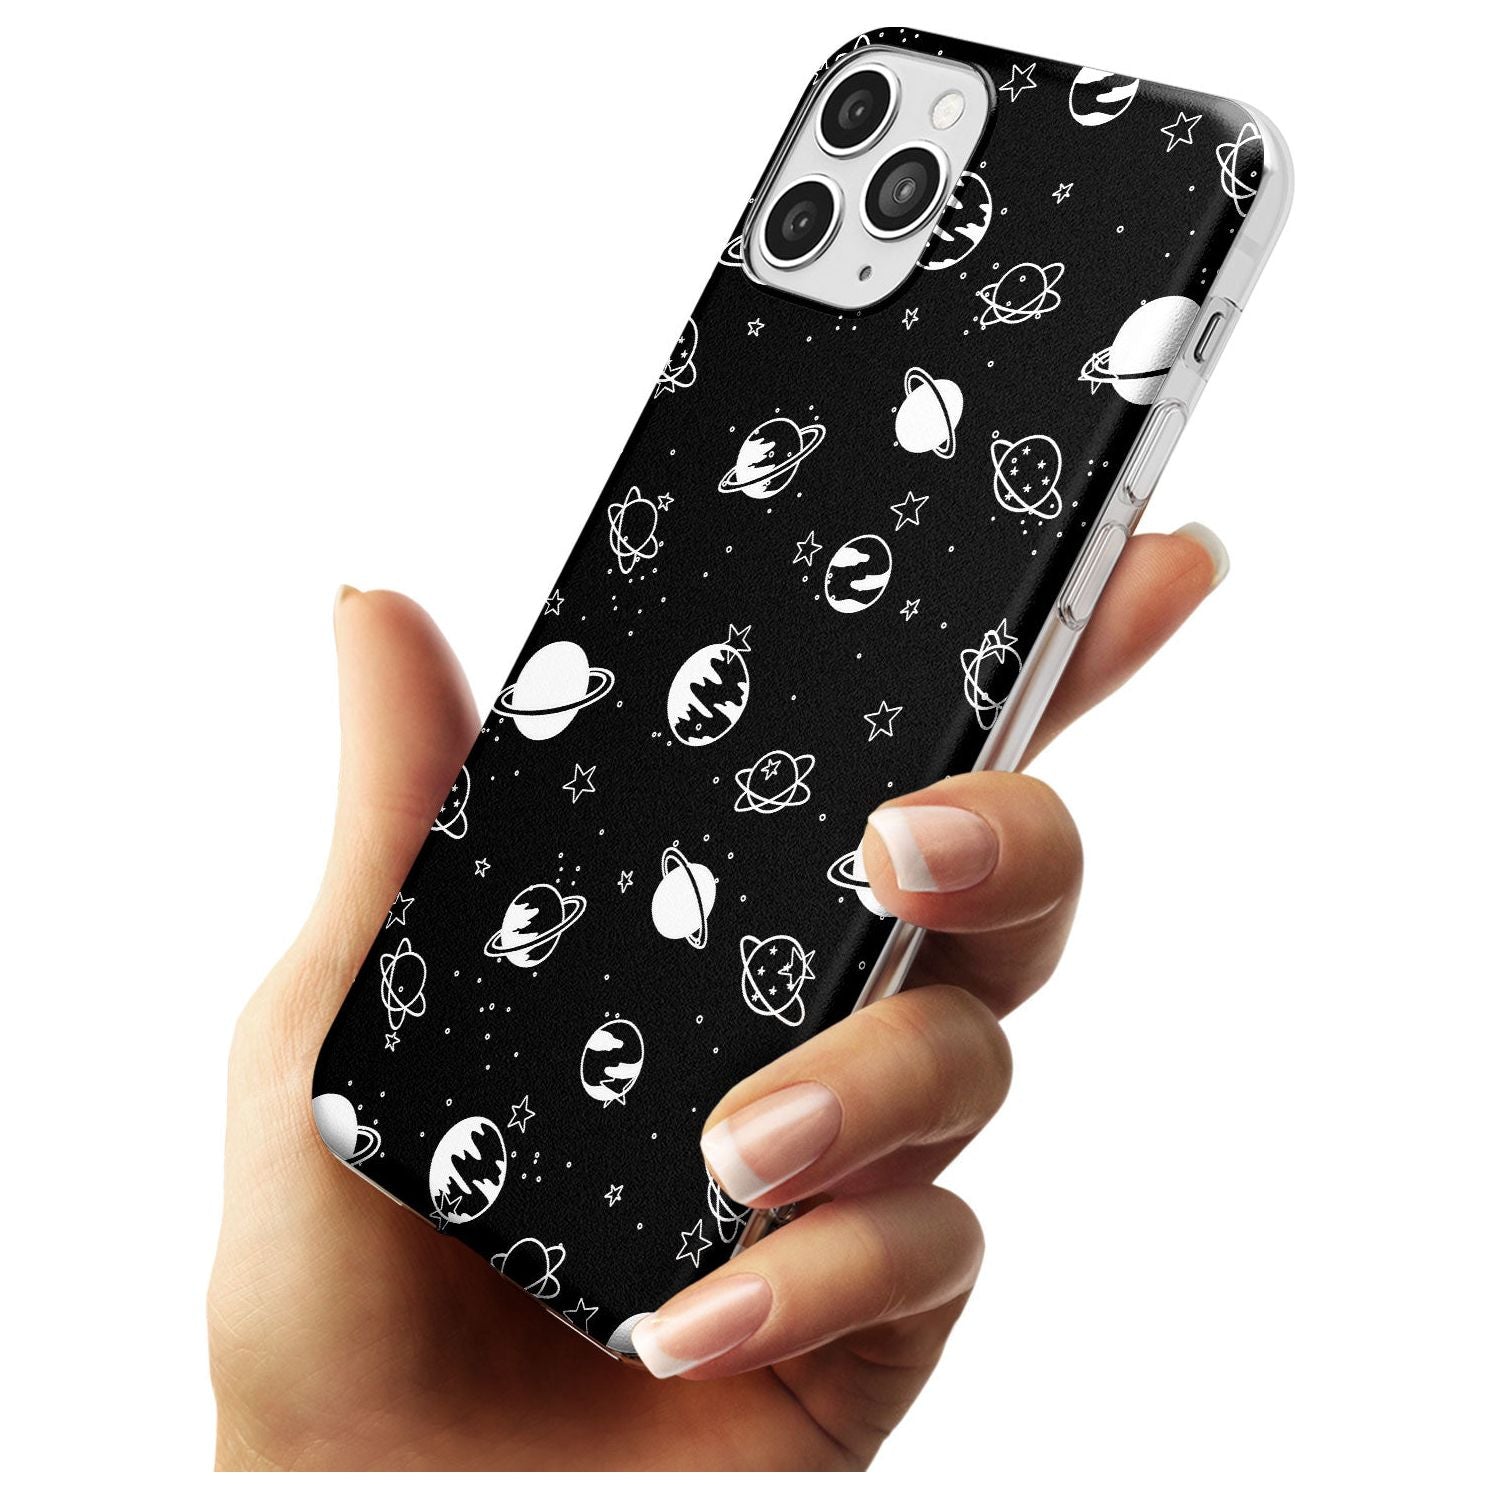 White Planets on Black Black Impact Phone Case for iPhone 11 Pro Max